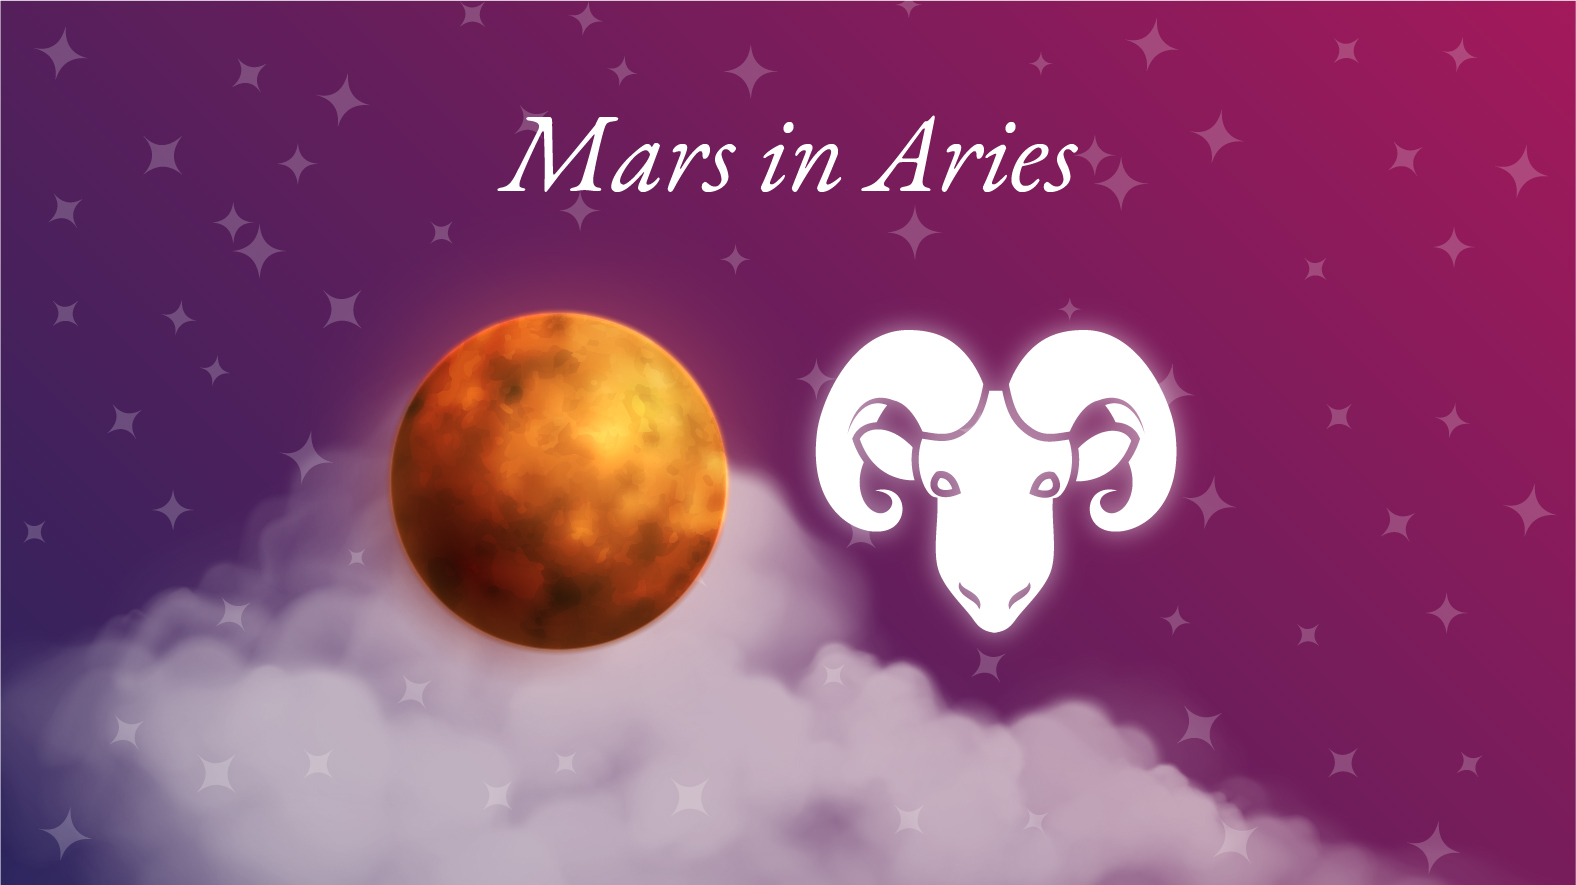 Mars in Aries Meaning